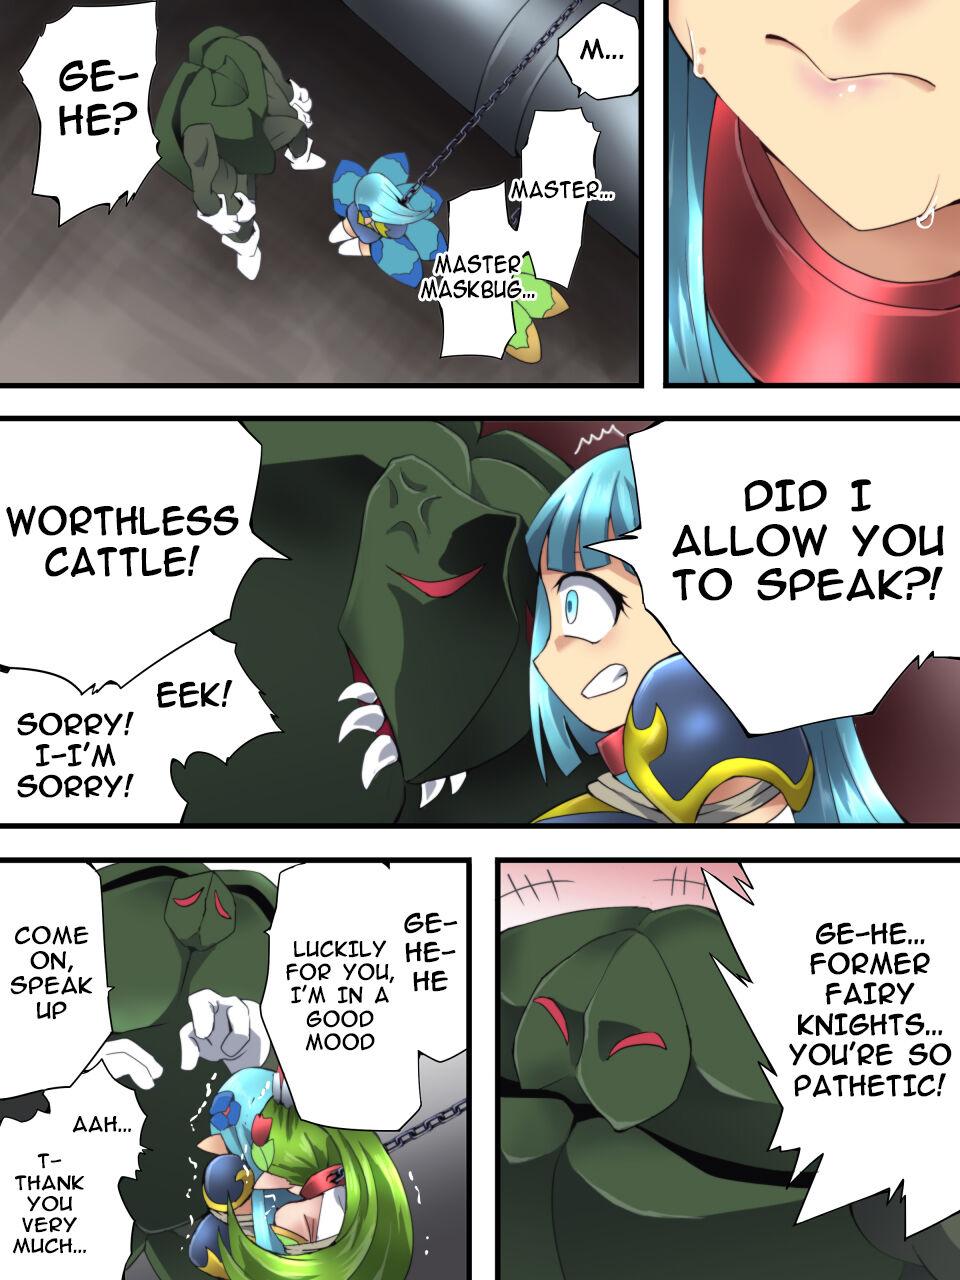 Famosa Fairy Knight Fairy Bloom Ep4 English Ver. Perfect Ass - Page 6